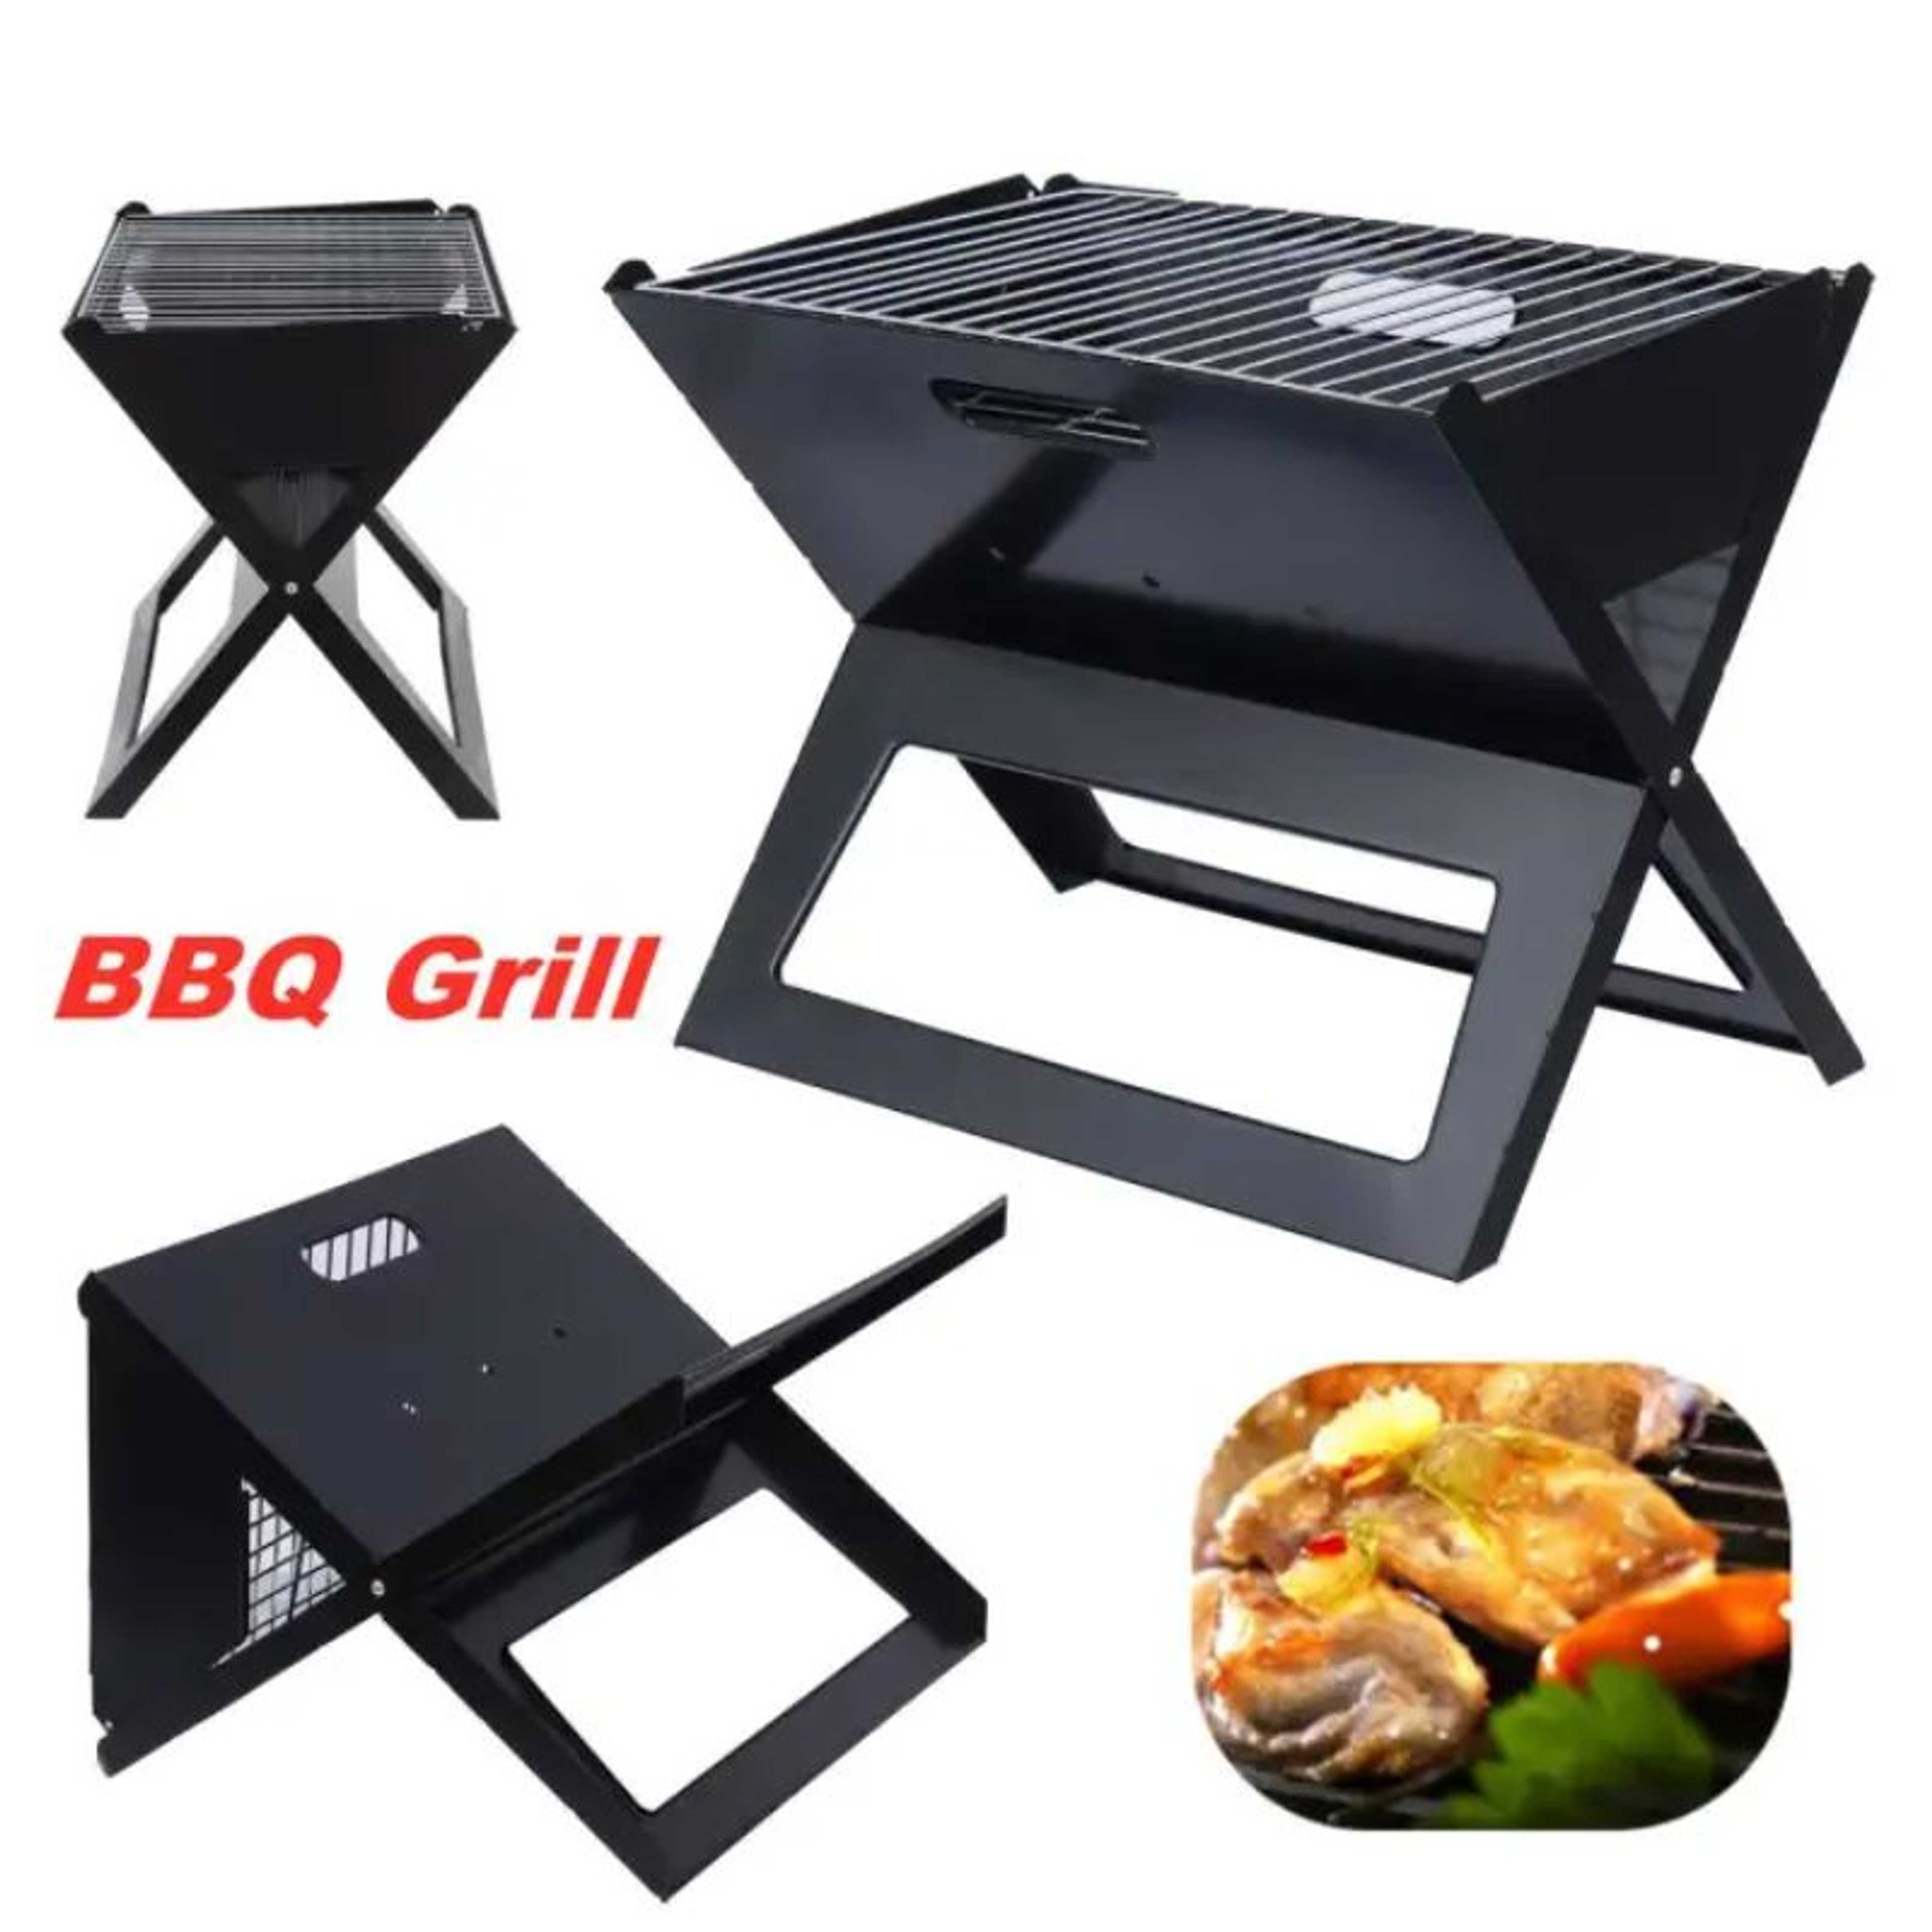 Portable Folding BBQ Grill Set for Outdoor Dinning and Camping Grills